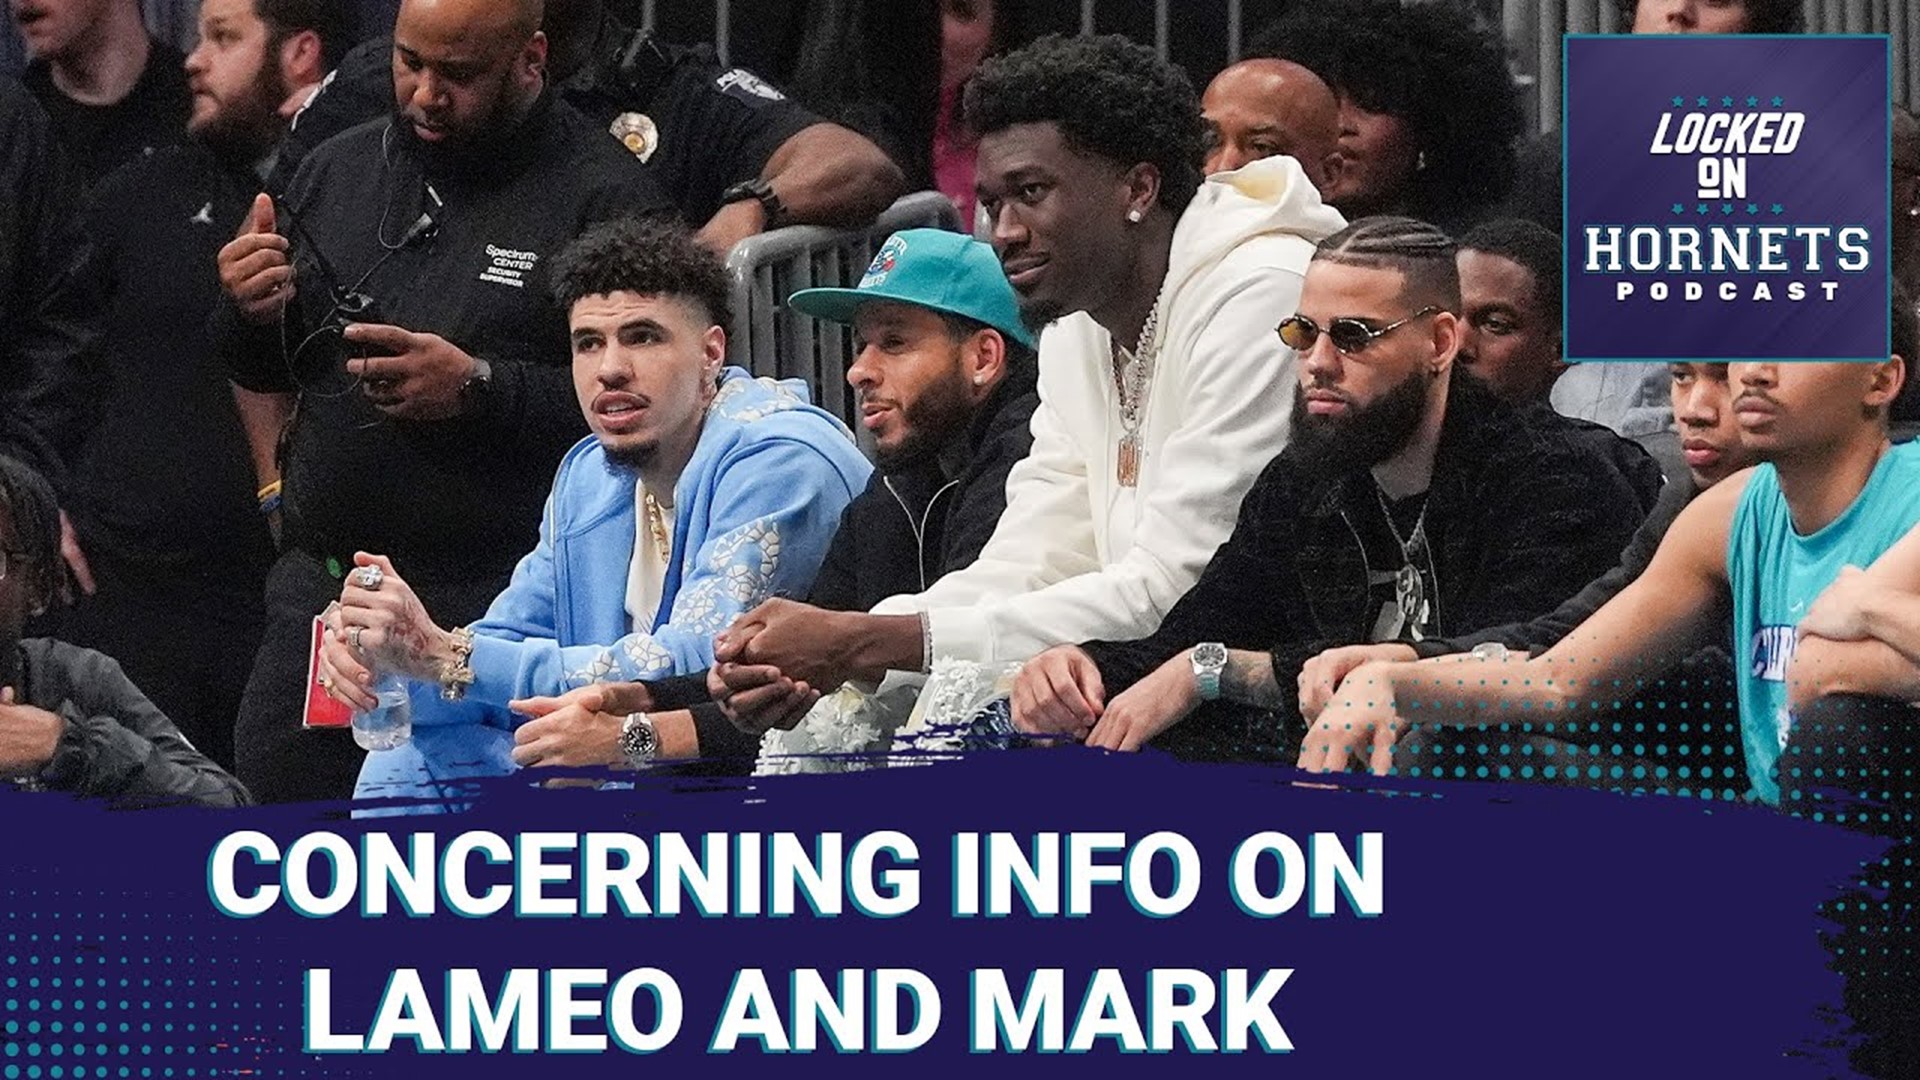 More concerning news on LaMelo Ball & Mark Williams. How should the Hornets respond this offseason?